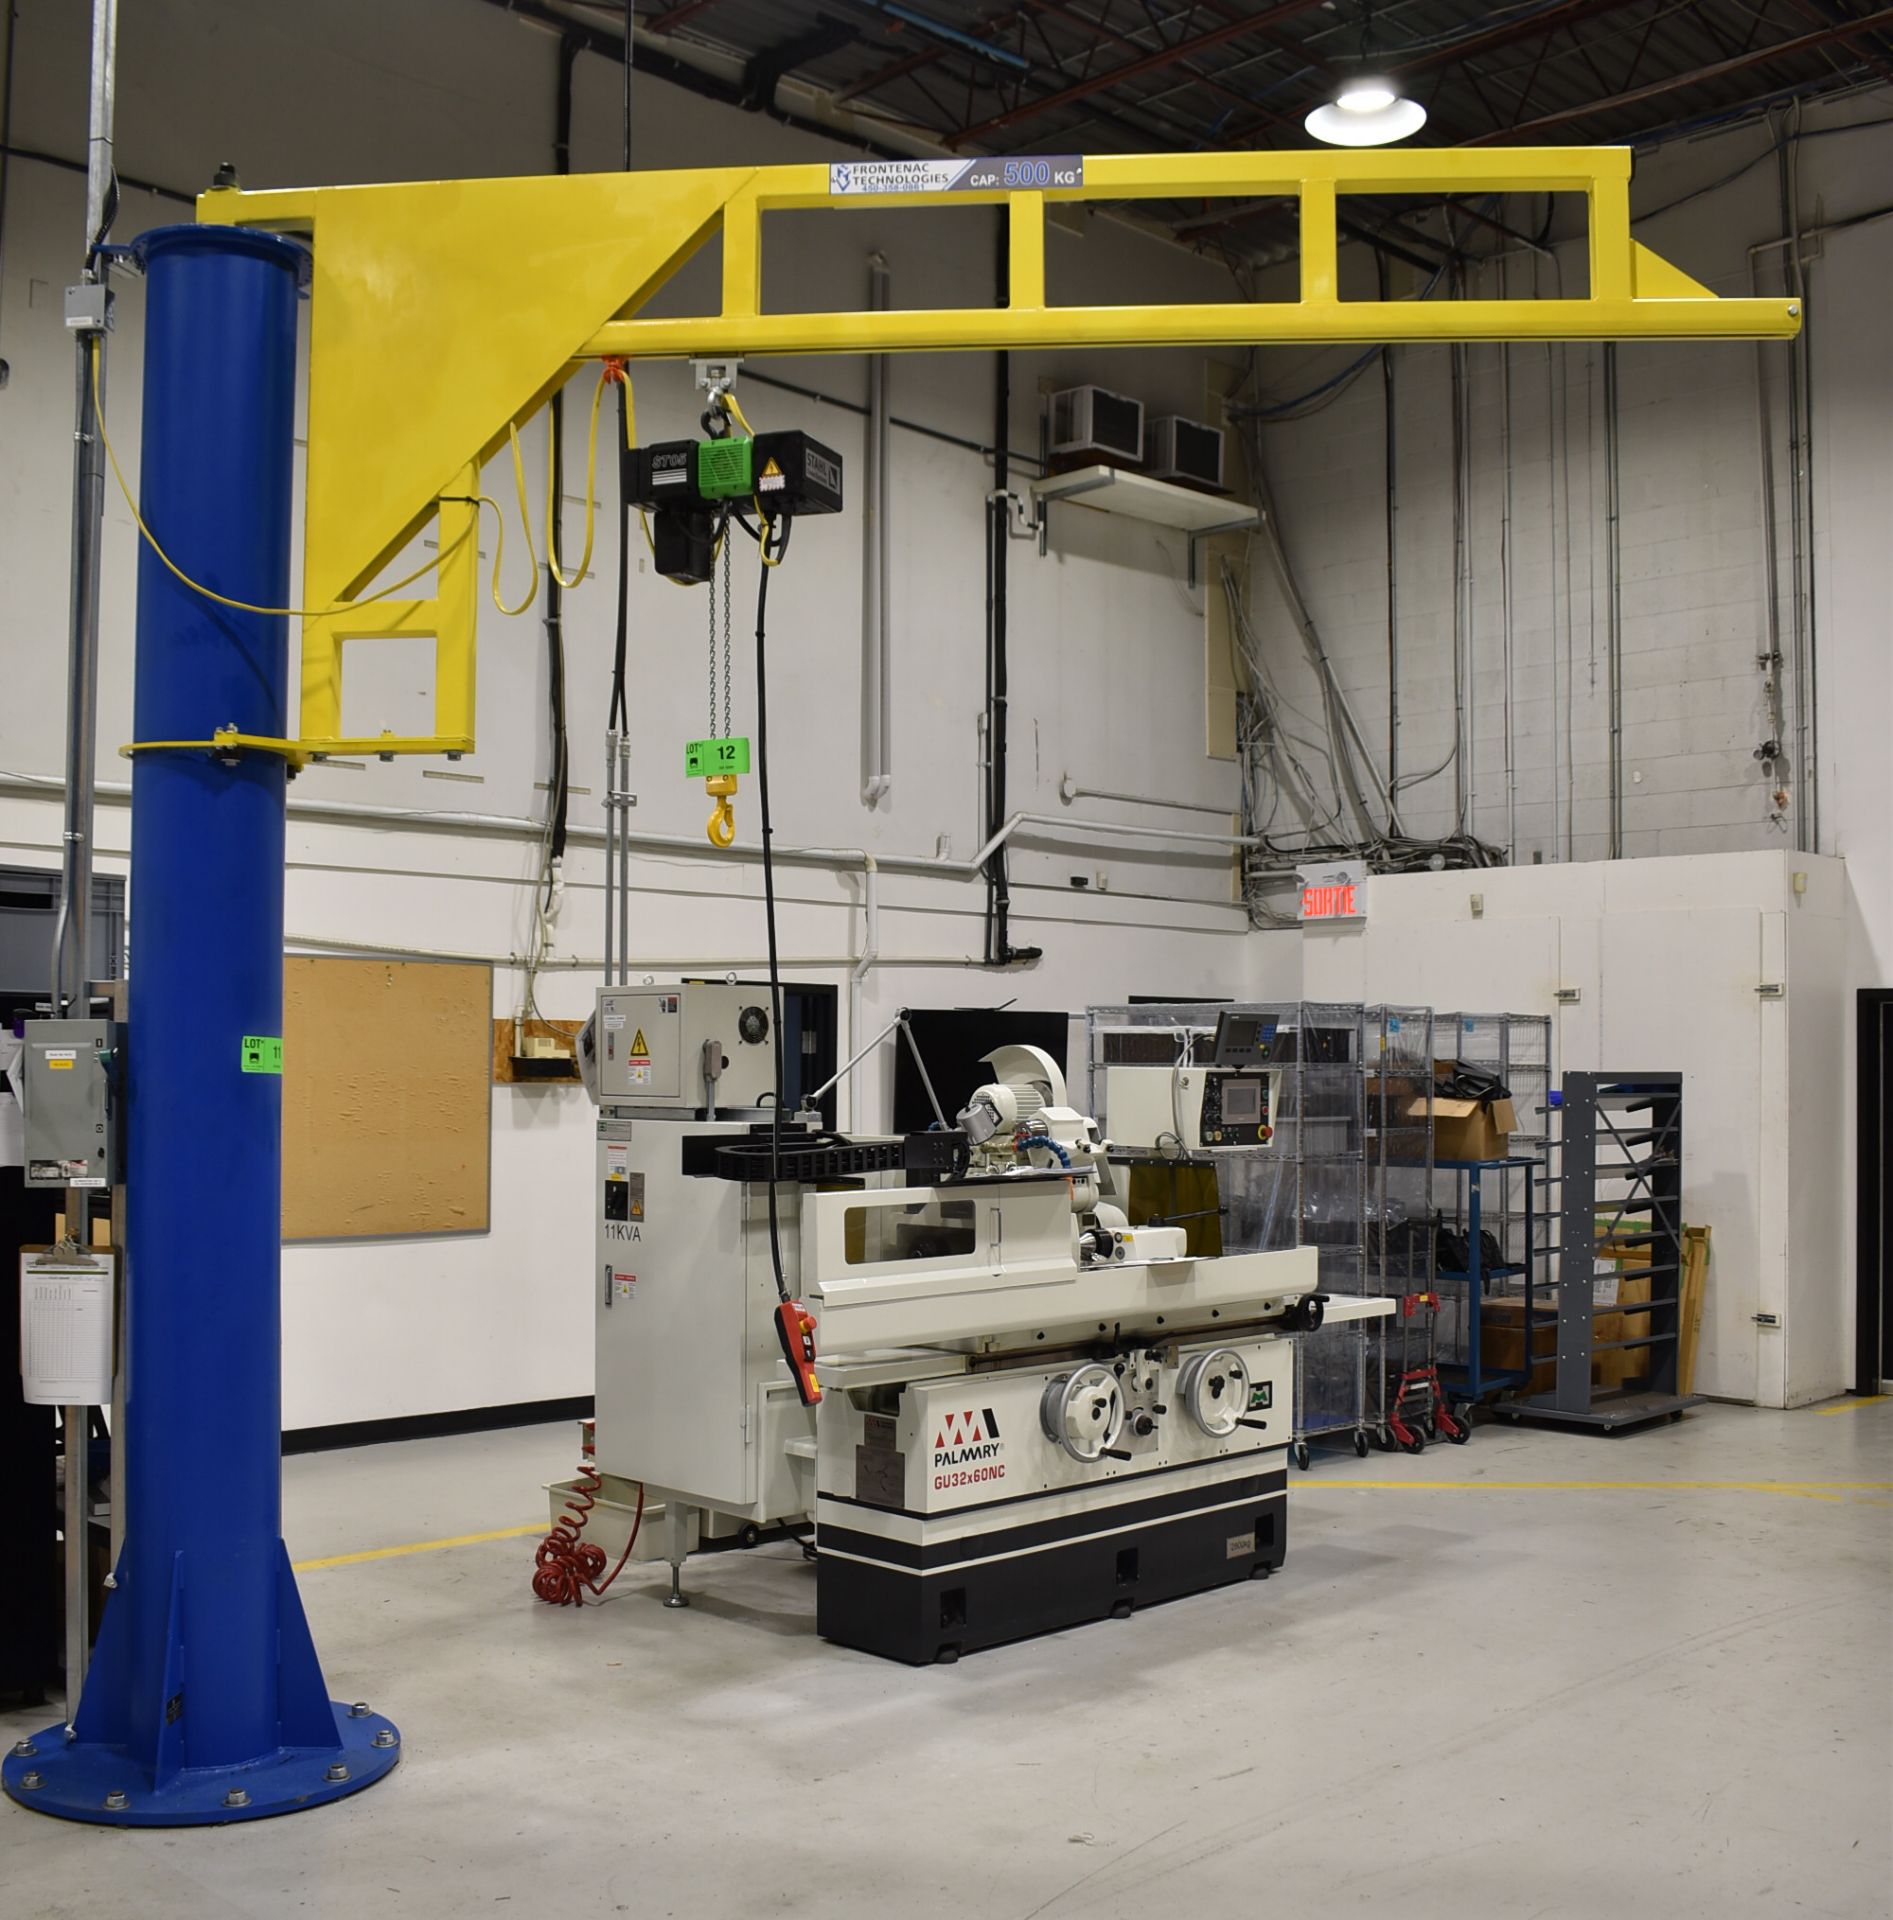 FRONTENAC TECHNOLOGIES 1/2 TON capacity free standing jib arm with STAHL crane system 1/2 TON - Image 2 of 3